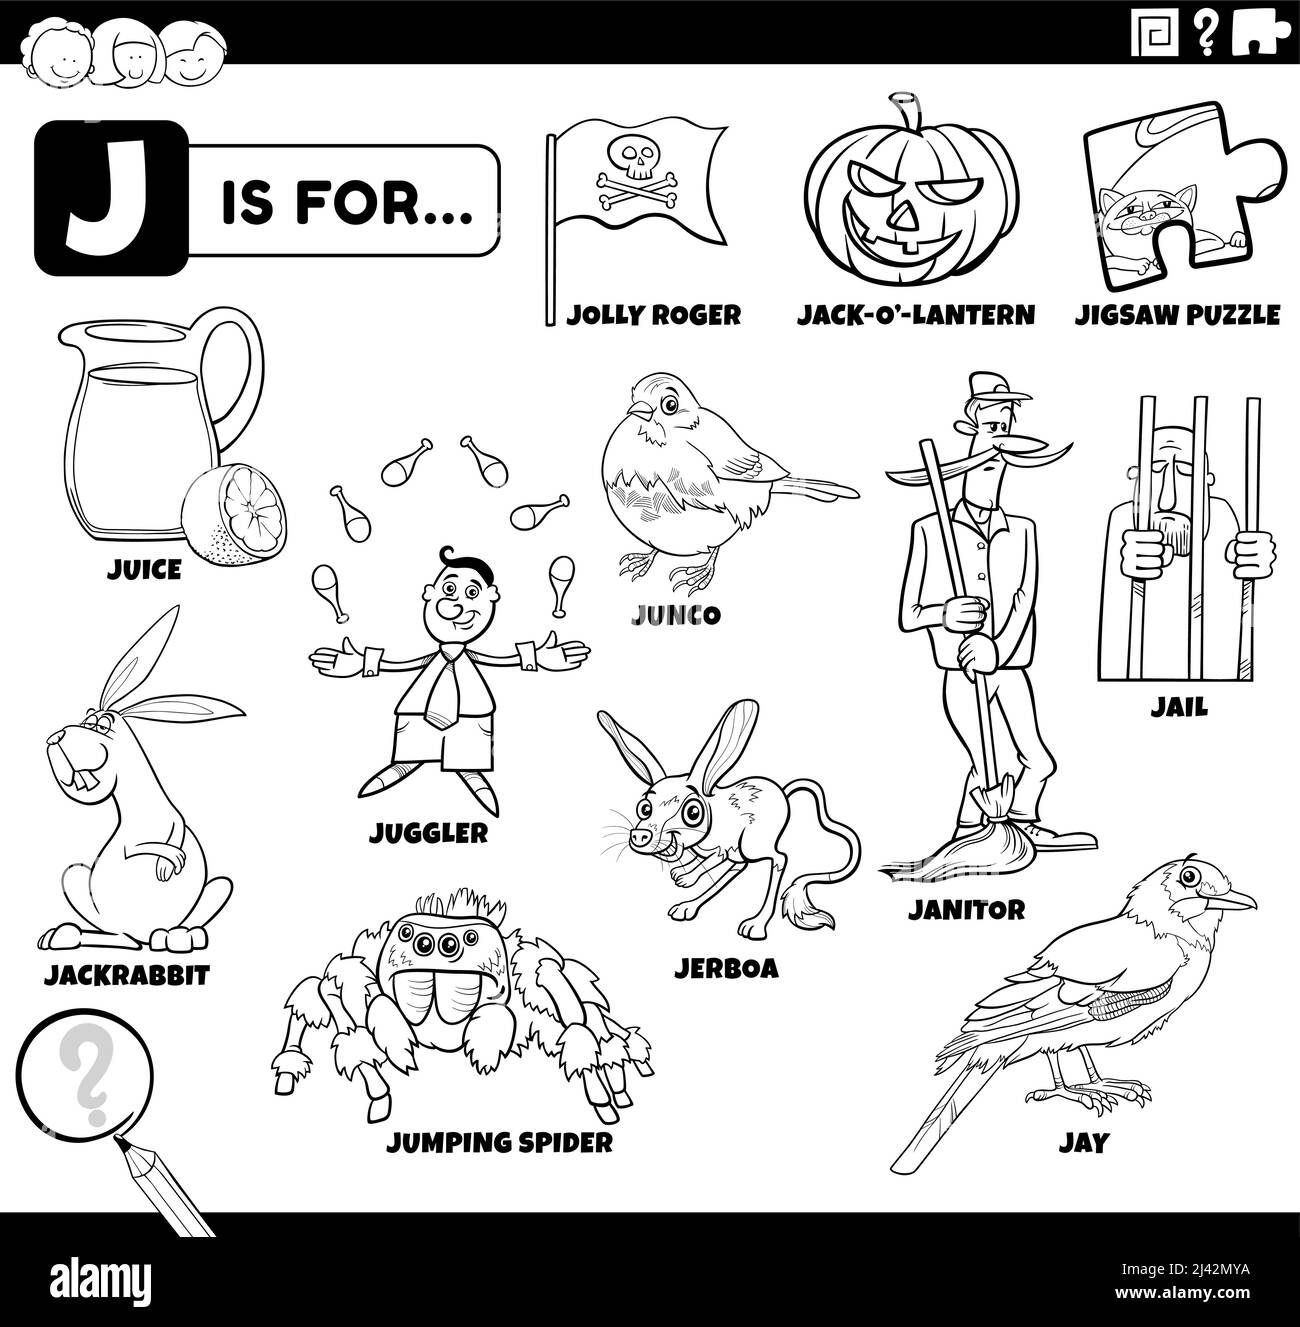 Black and white educational cartoon illustration for children with comic characters and objects set for letter J coloring book page Stock Vector